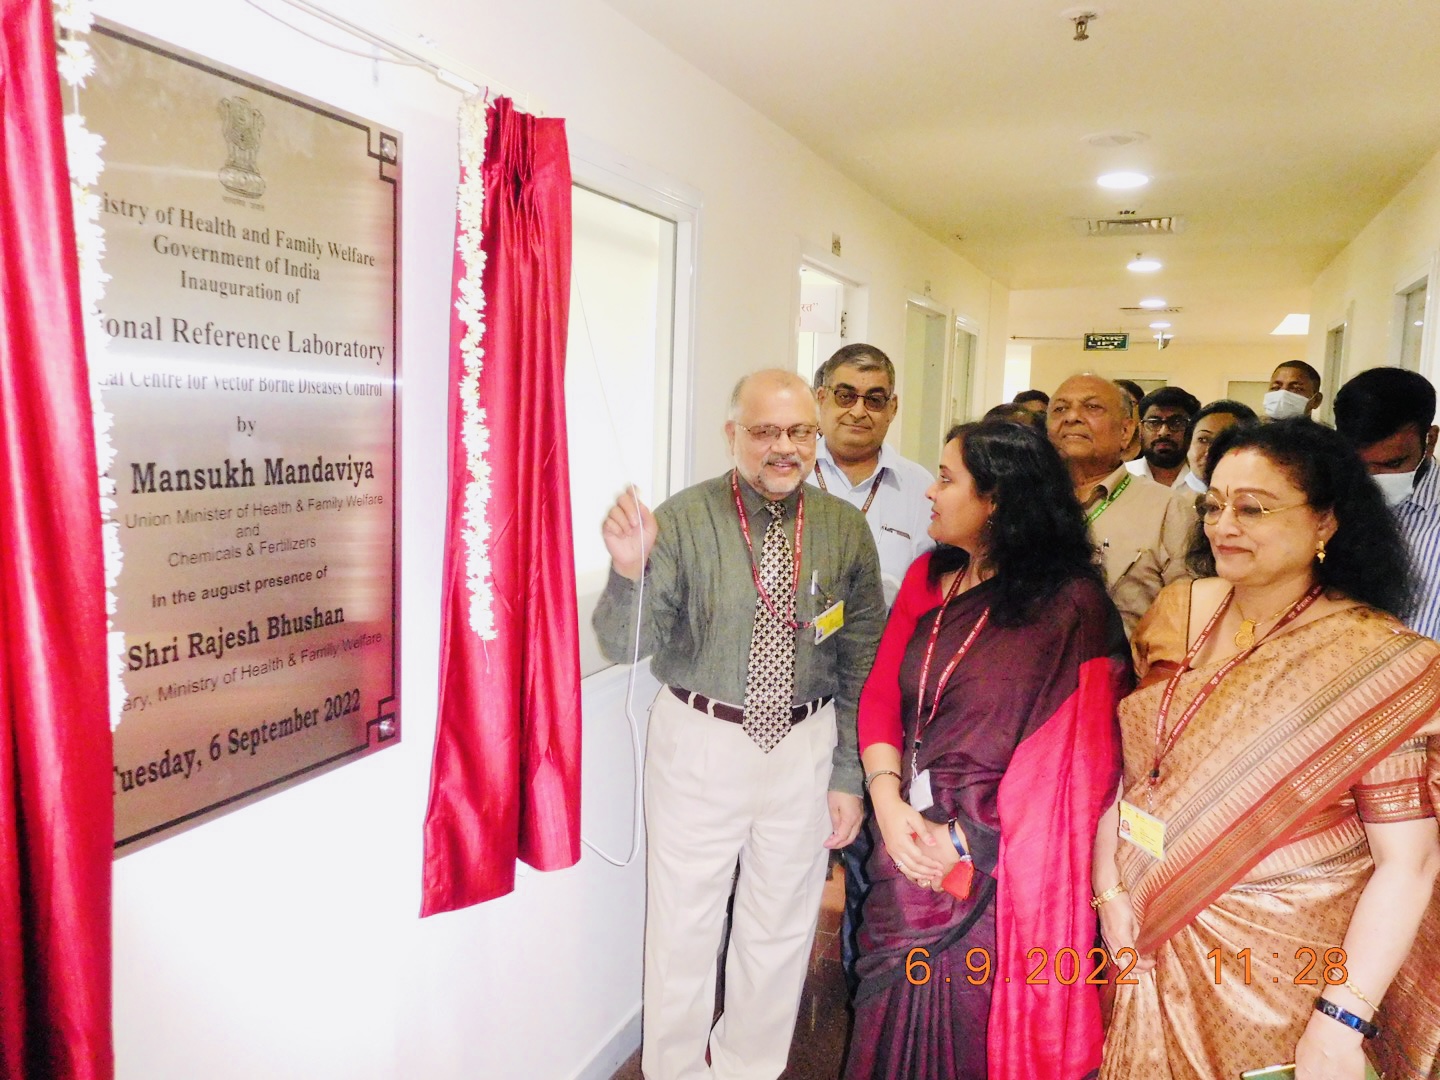 E. Inauguration of National Reference Laboratory at National Center for Vector Borne Diseases Control, Delhi on 6th September 2022